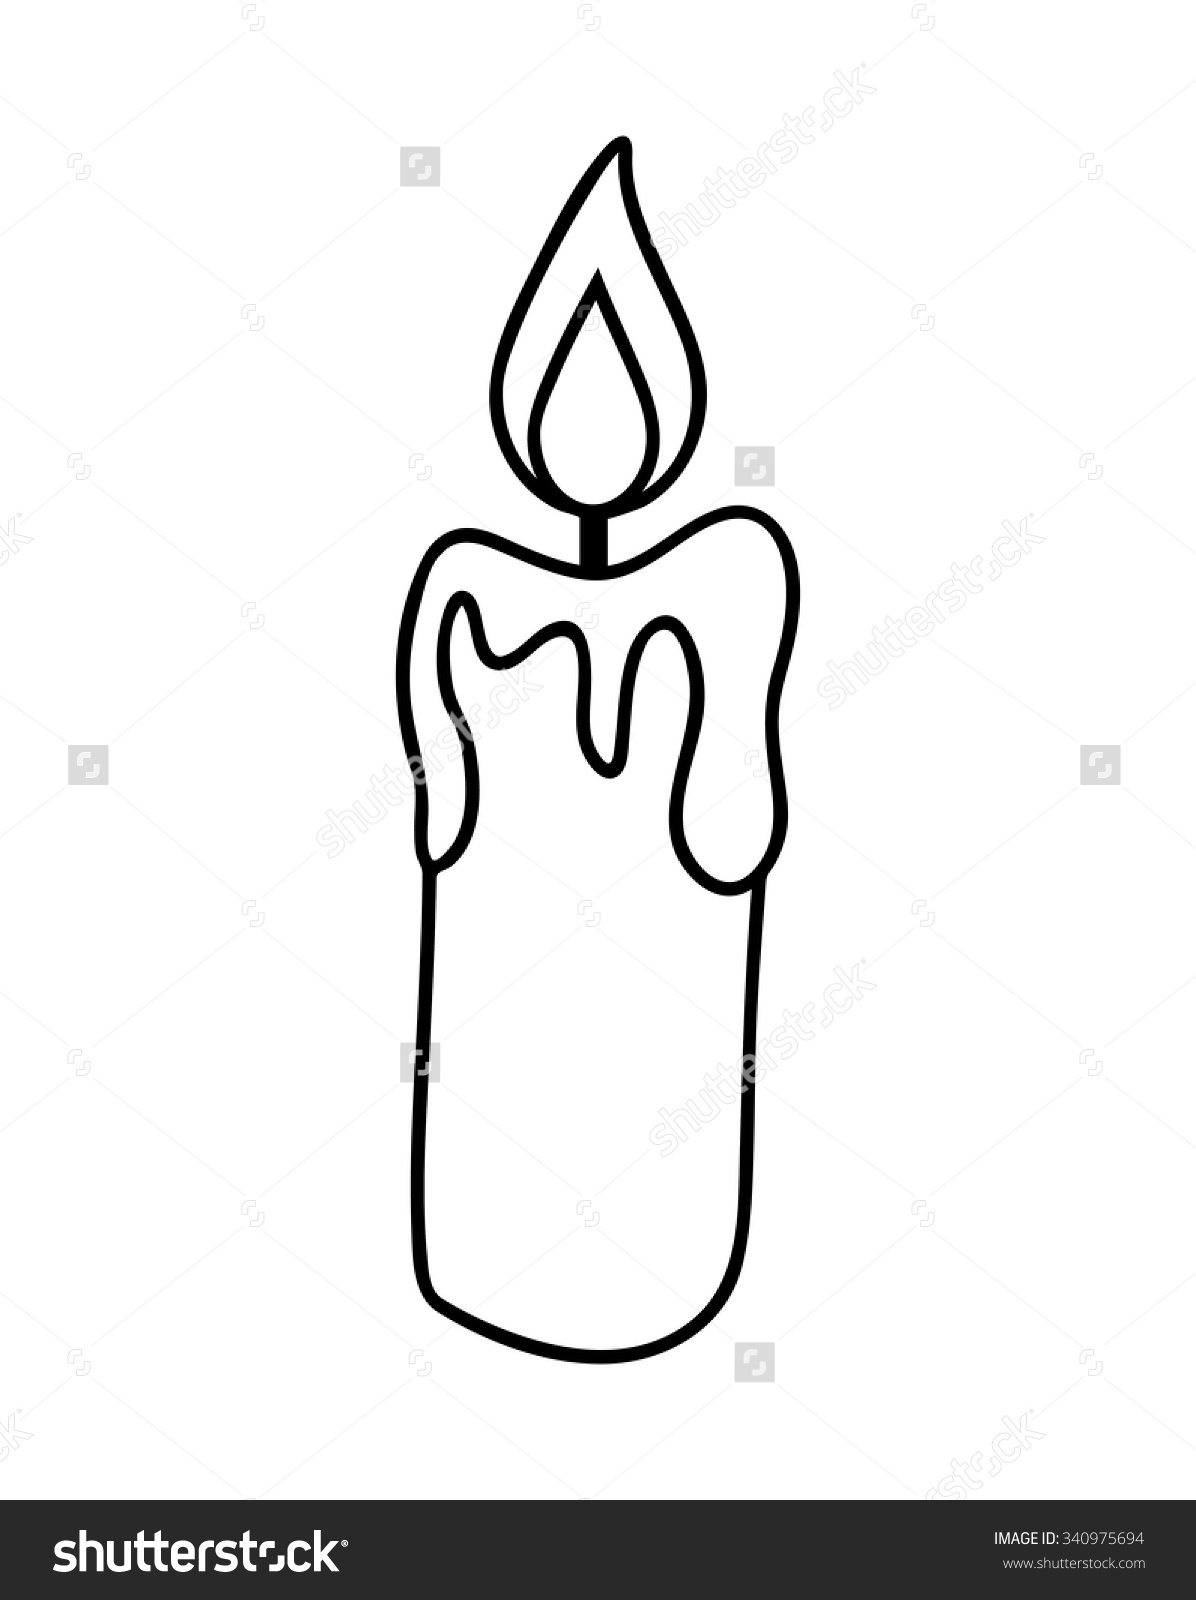 Candle Flame Clipart Black And ... Save to a lightbox